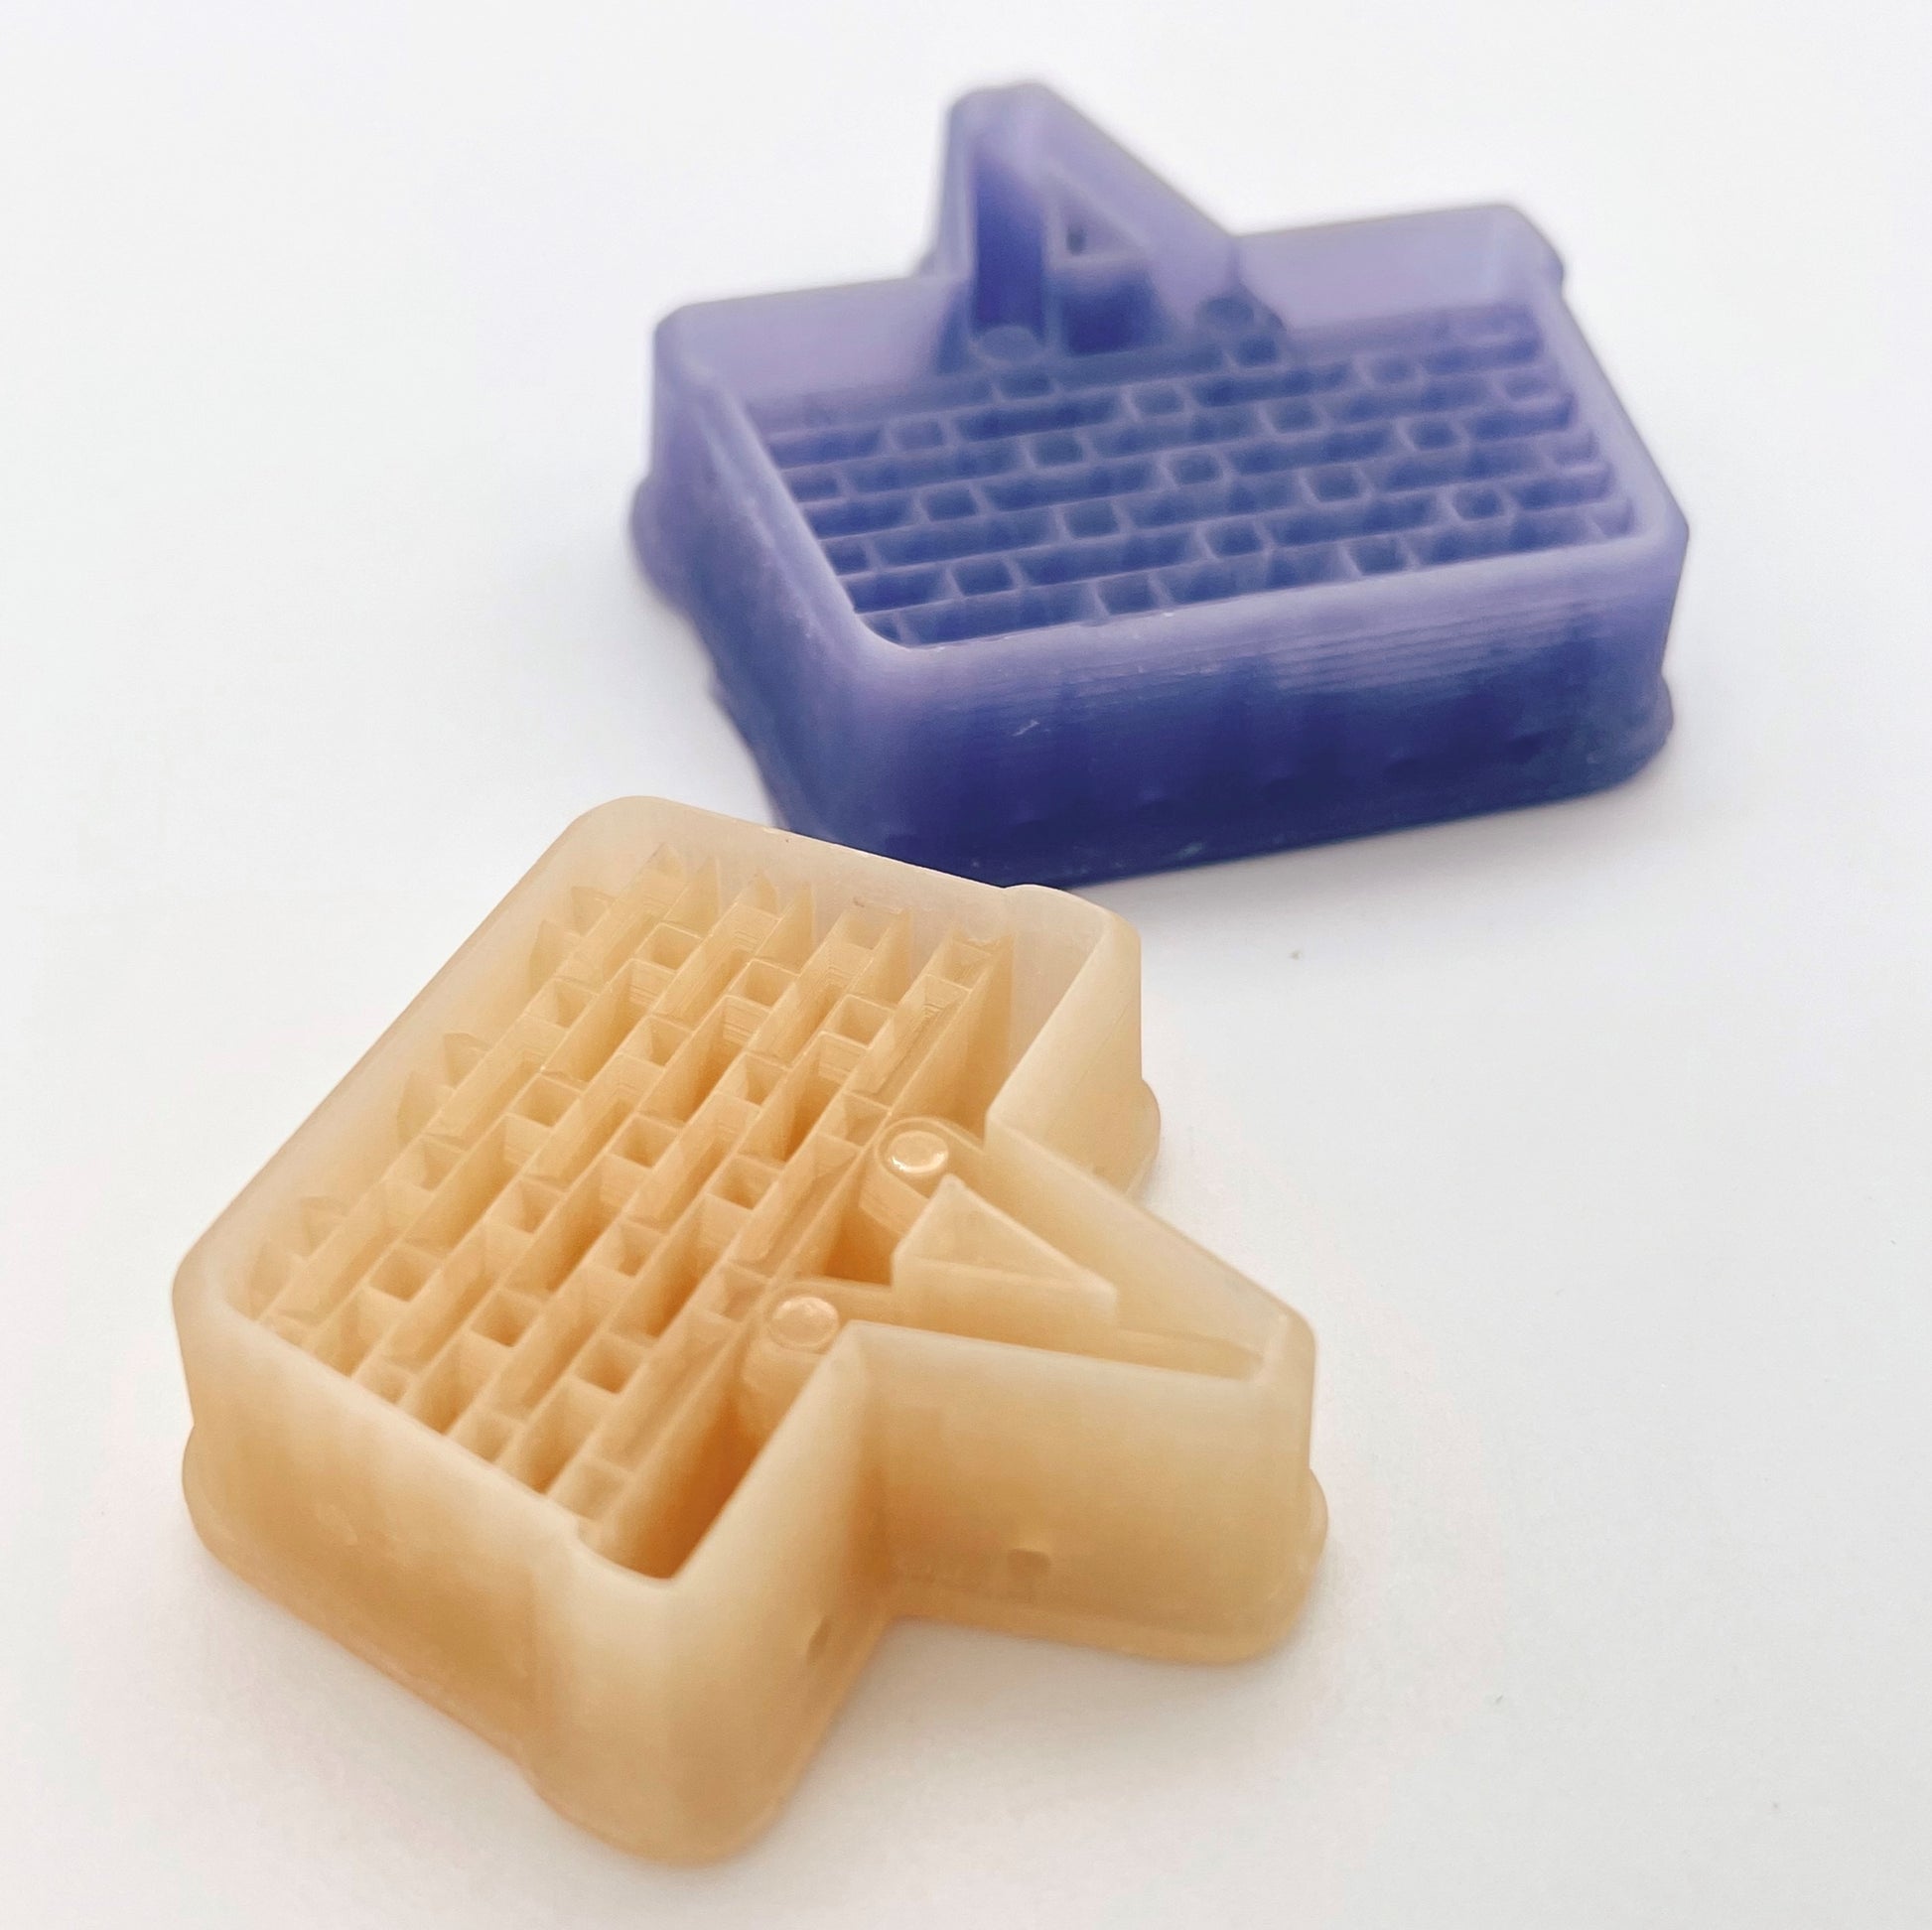 3d printed picnic basket debossing polymer clay cutter made of resin, polymer clay tools and supplies for jewelry and earring making.